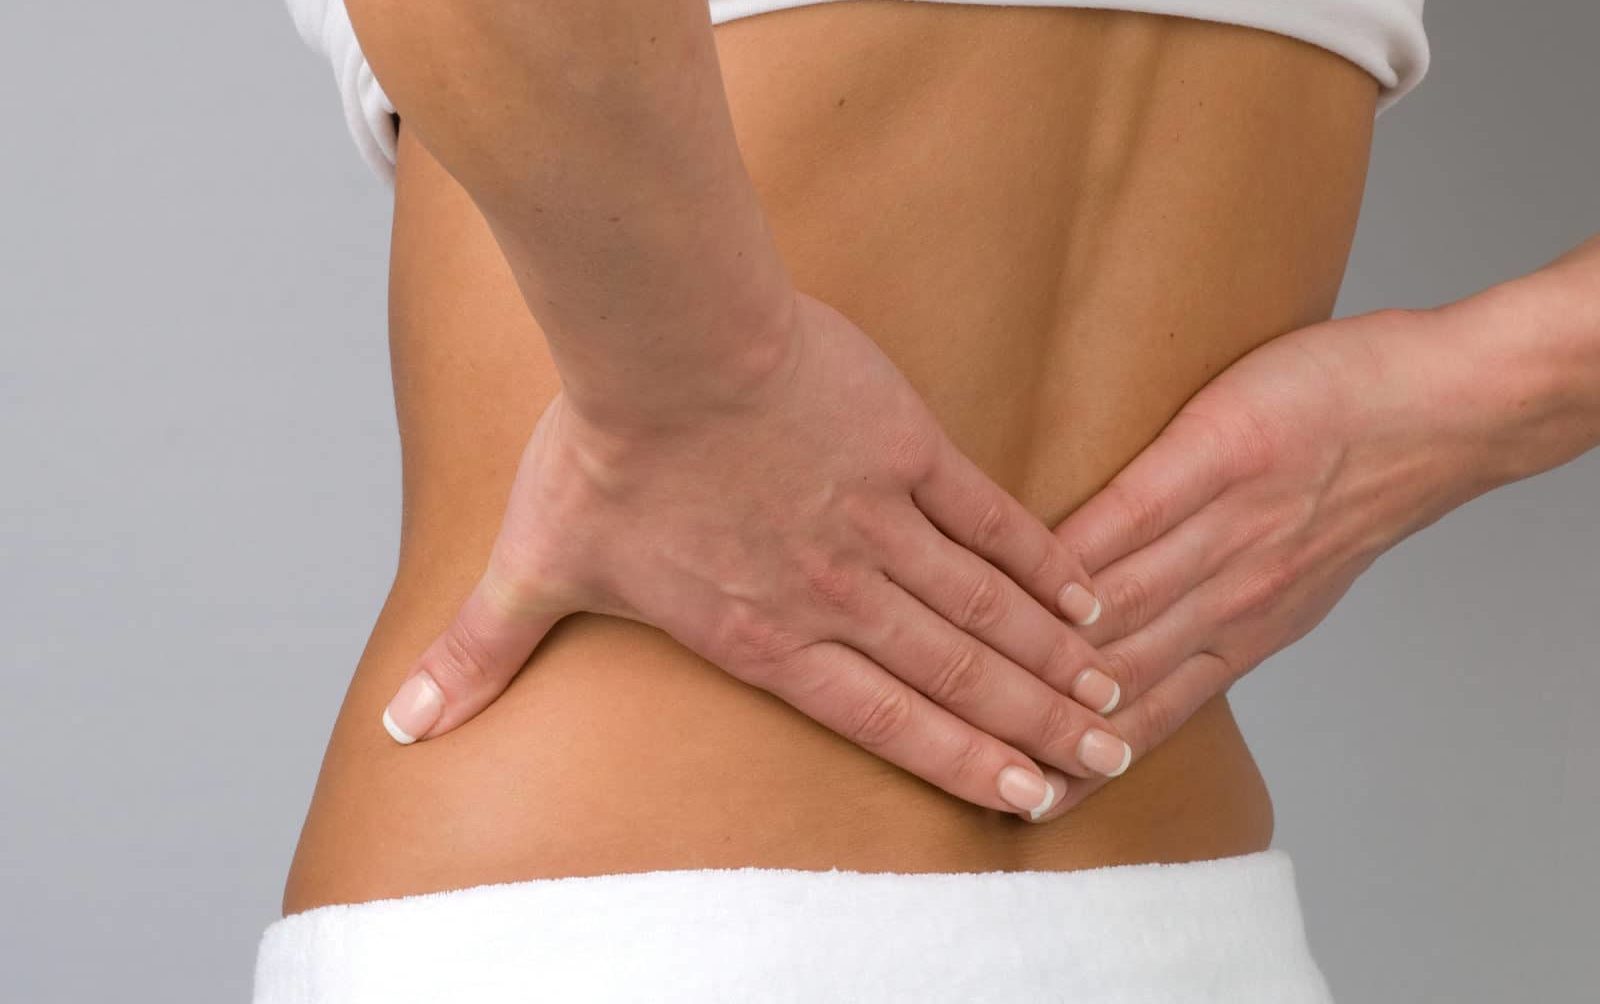 a person experiencing pain on the lower back